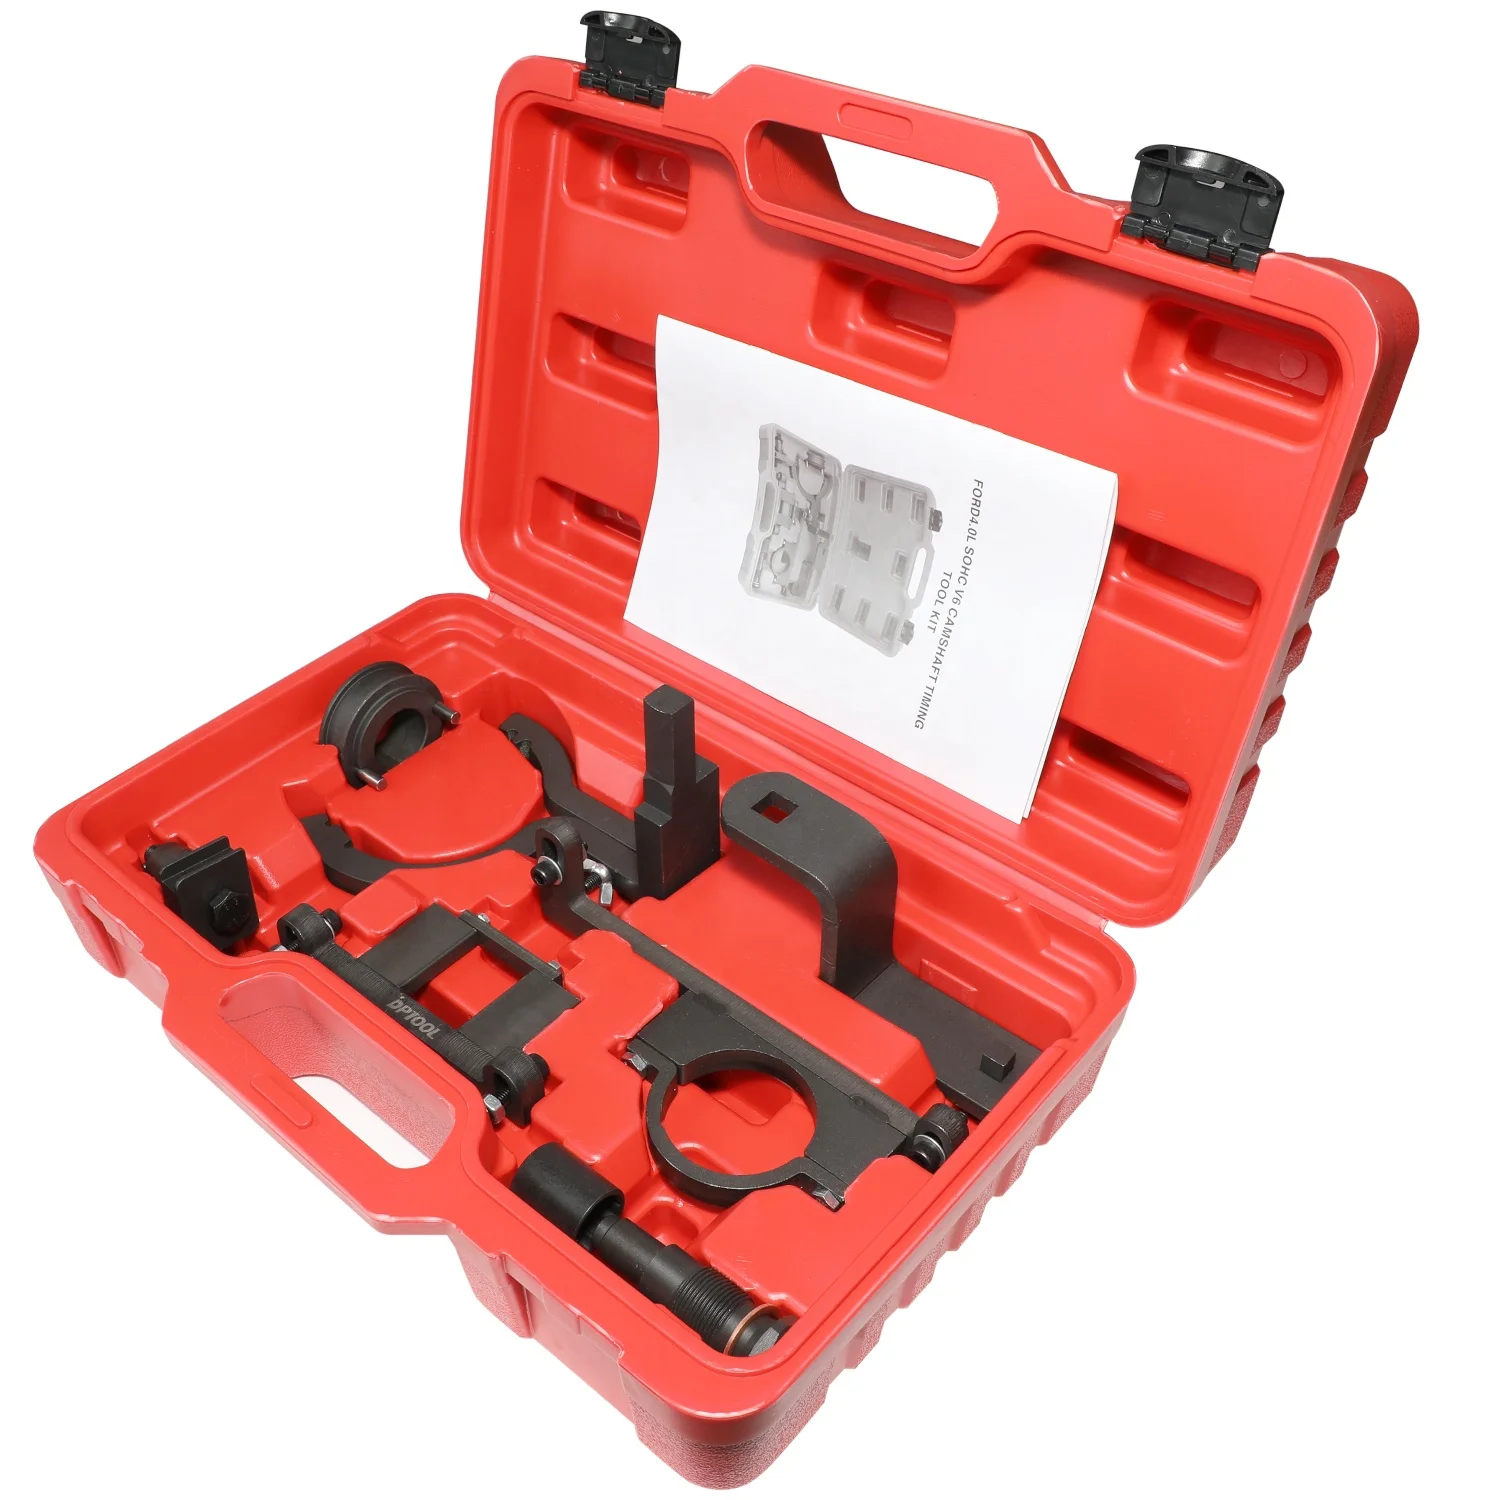 

Hot selling automotive tool repairing tool set for Ford Land Rover 4.0 Camshaft Timing Tool Kit